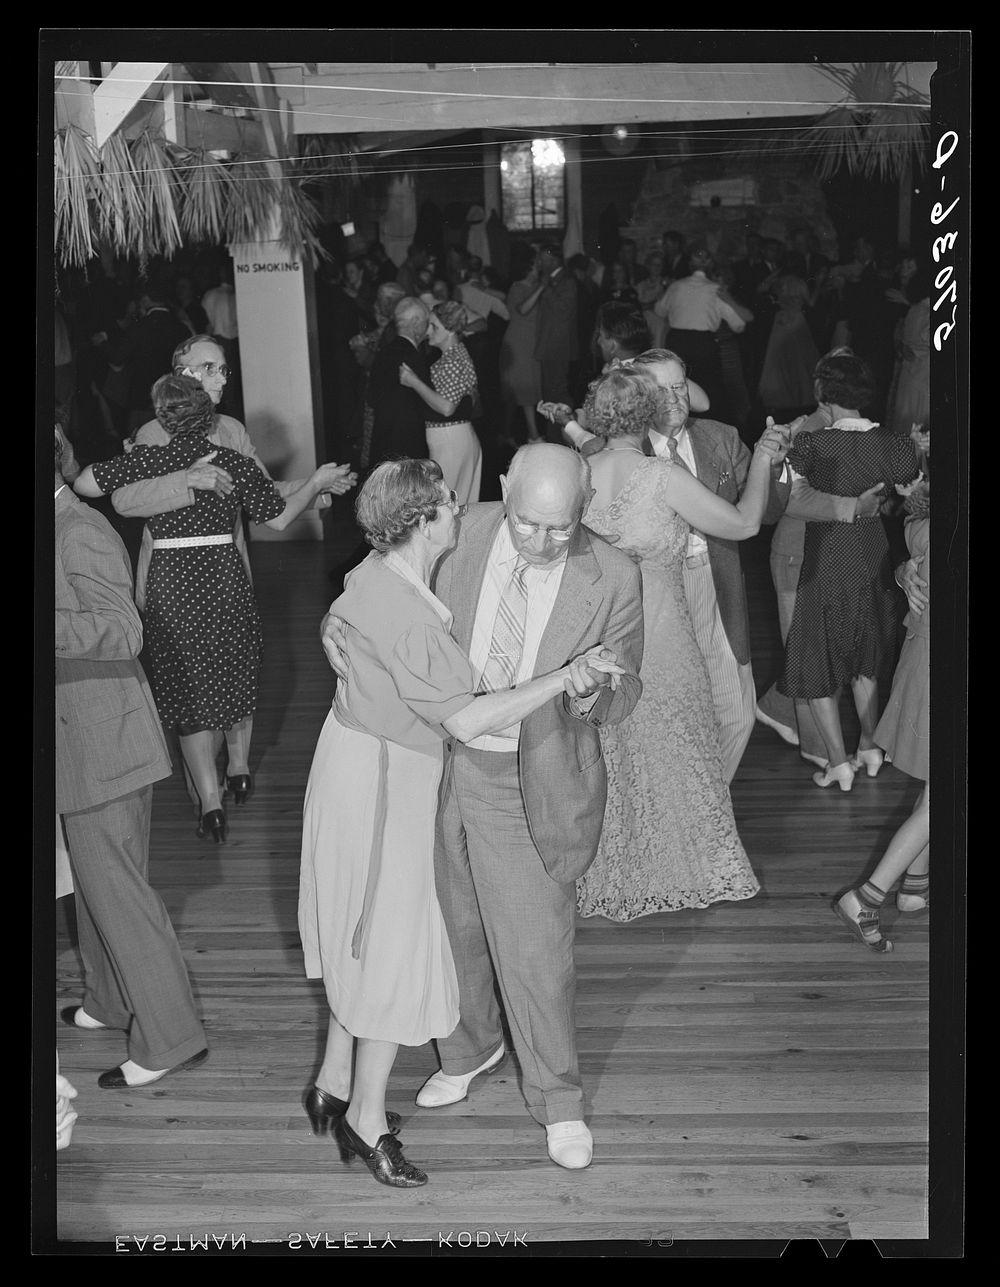 Dances are held regularly for the entertainment of guests at Sarasota trailer park. Sarasota, Florida. Sourced from the…